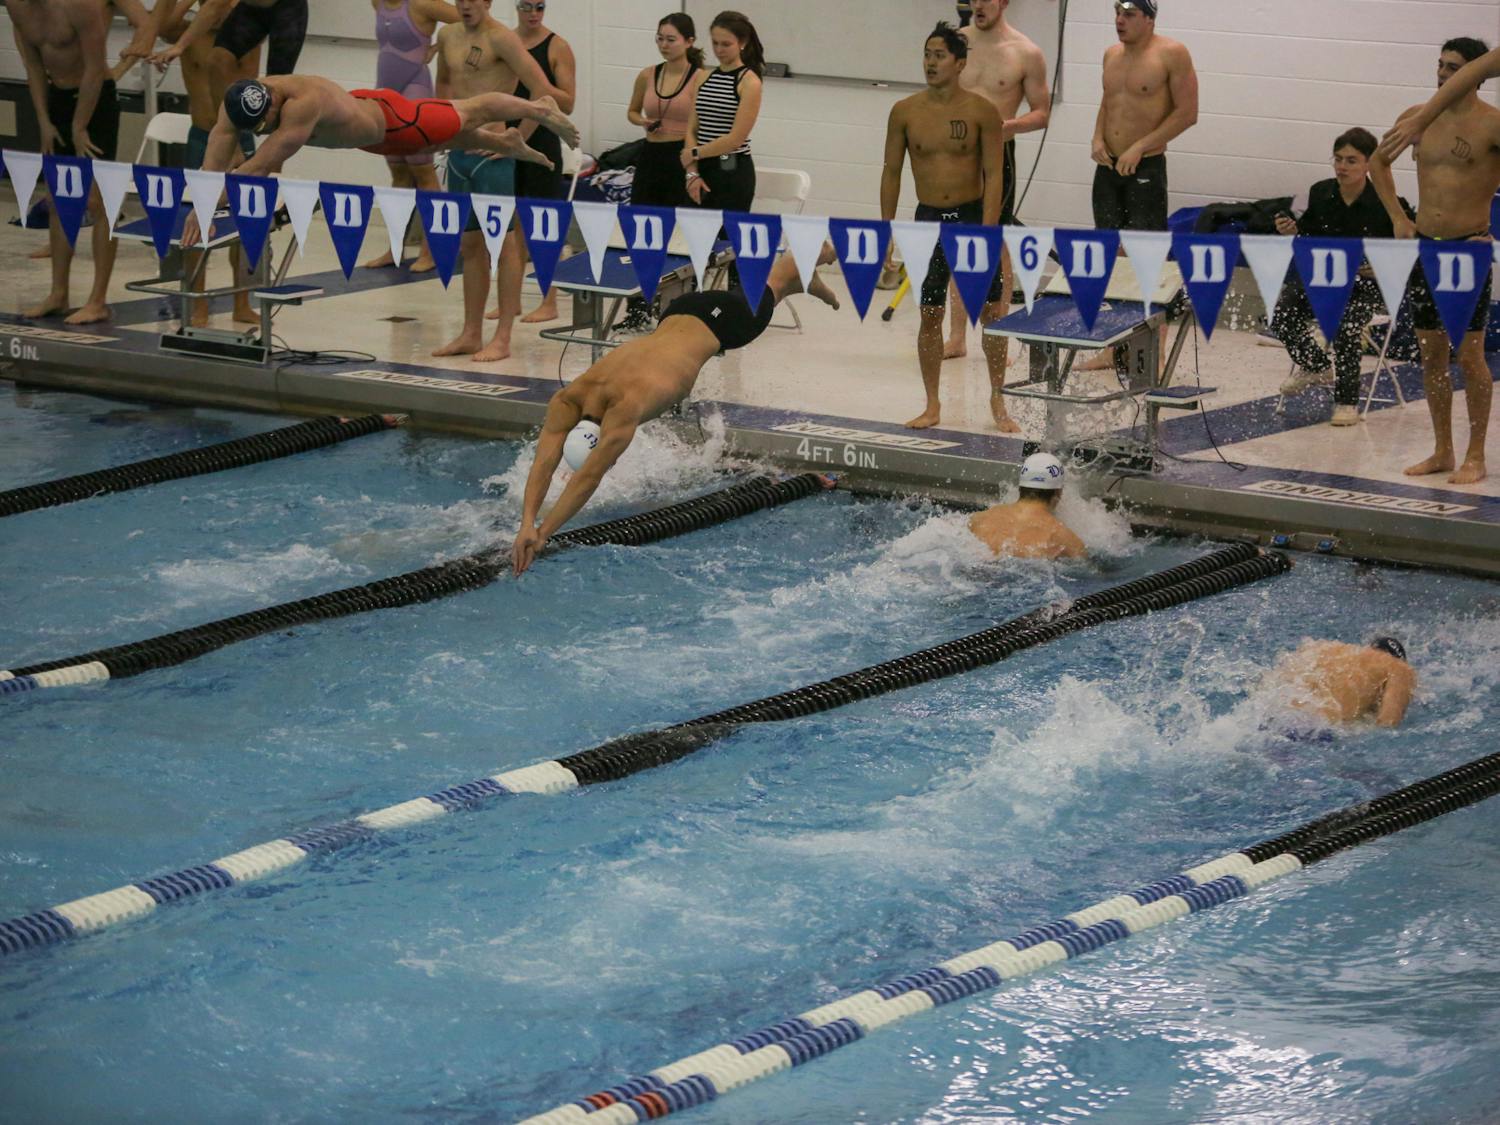 Duke's men's team secured its first win of the season Friday against Queens.